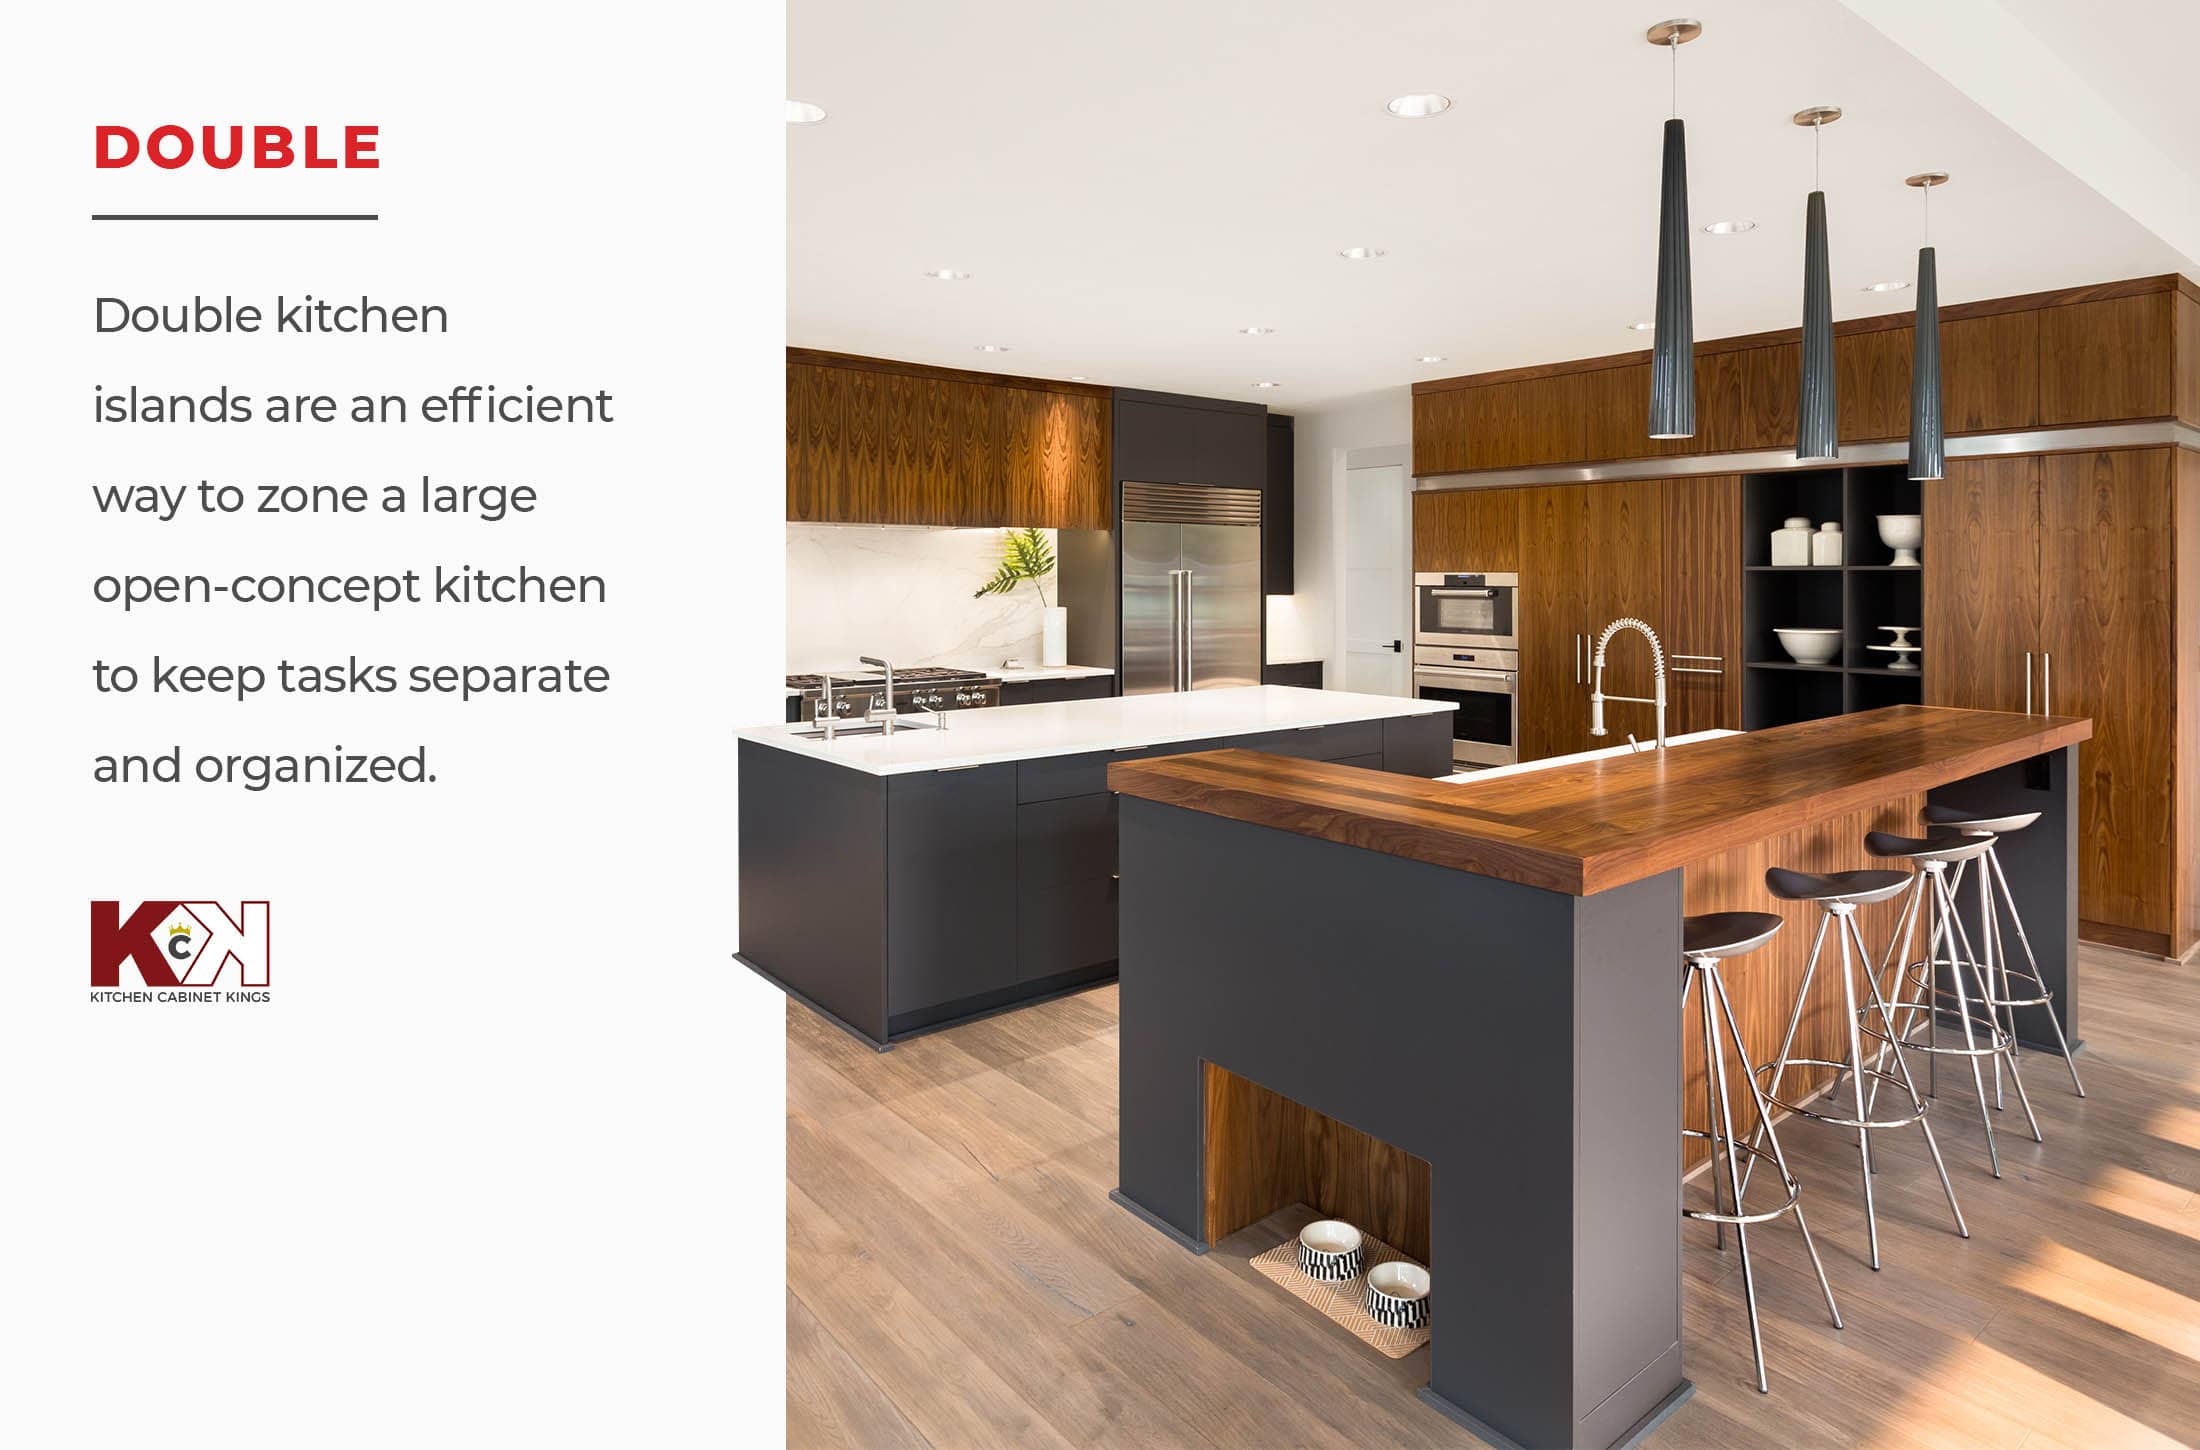 Image and definition of double kitchen island.